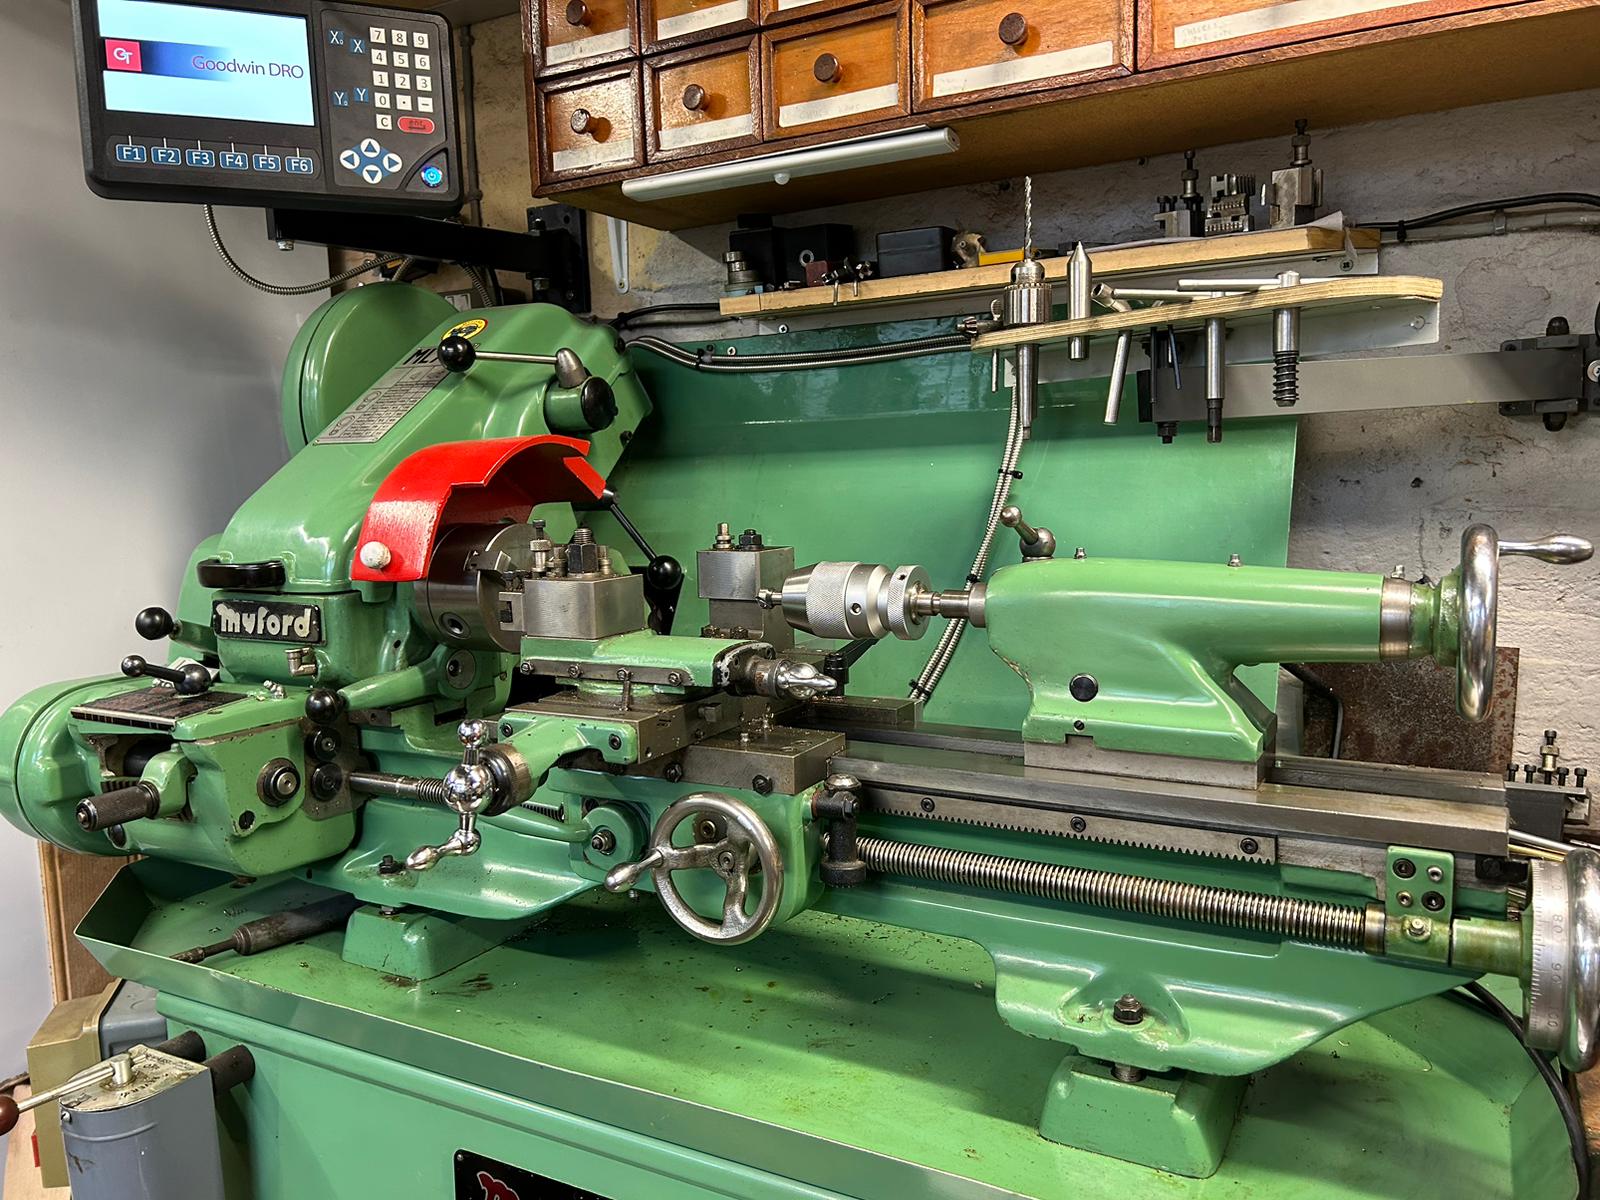 Digital-Readout-for-Myford-lathe